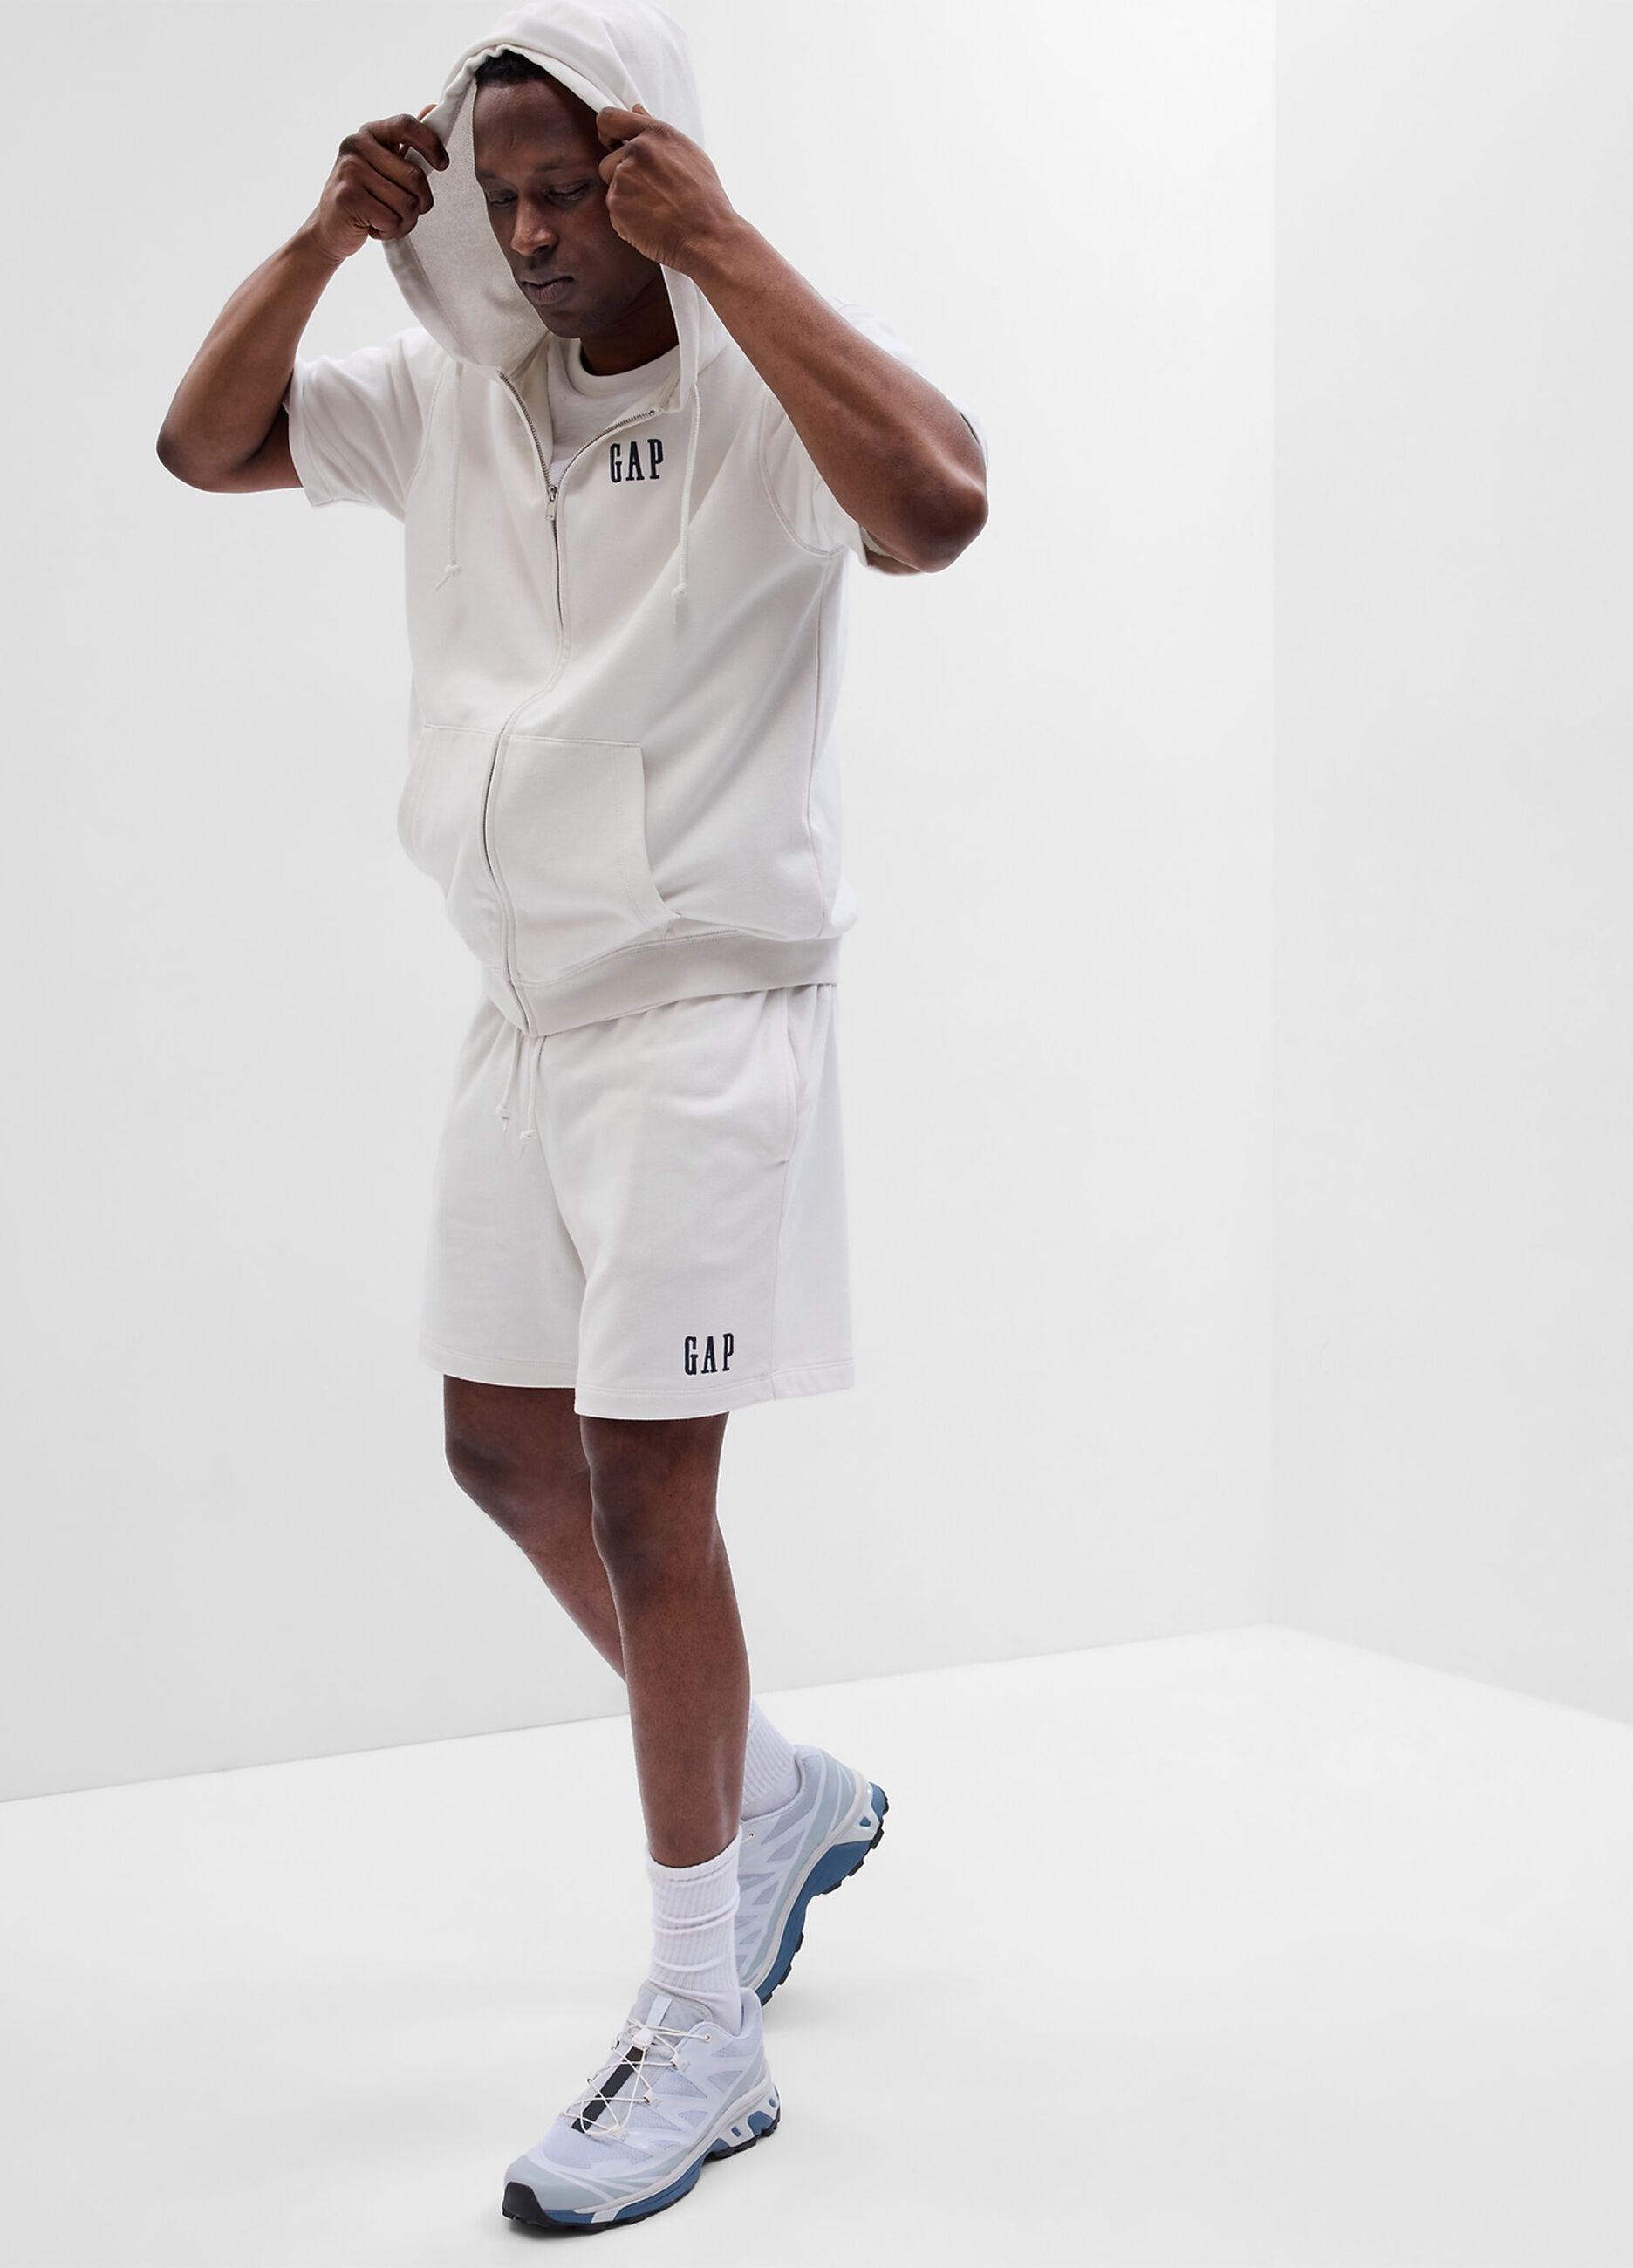 FEAR OF GOD FRENCH TERRY BBALL SHORTS